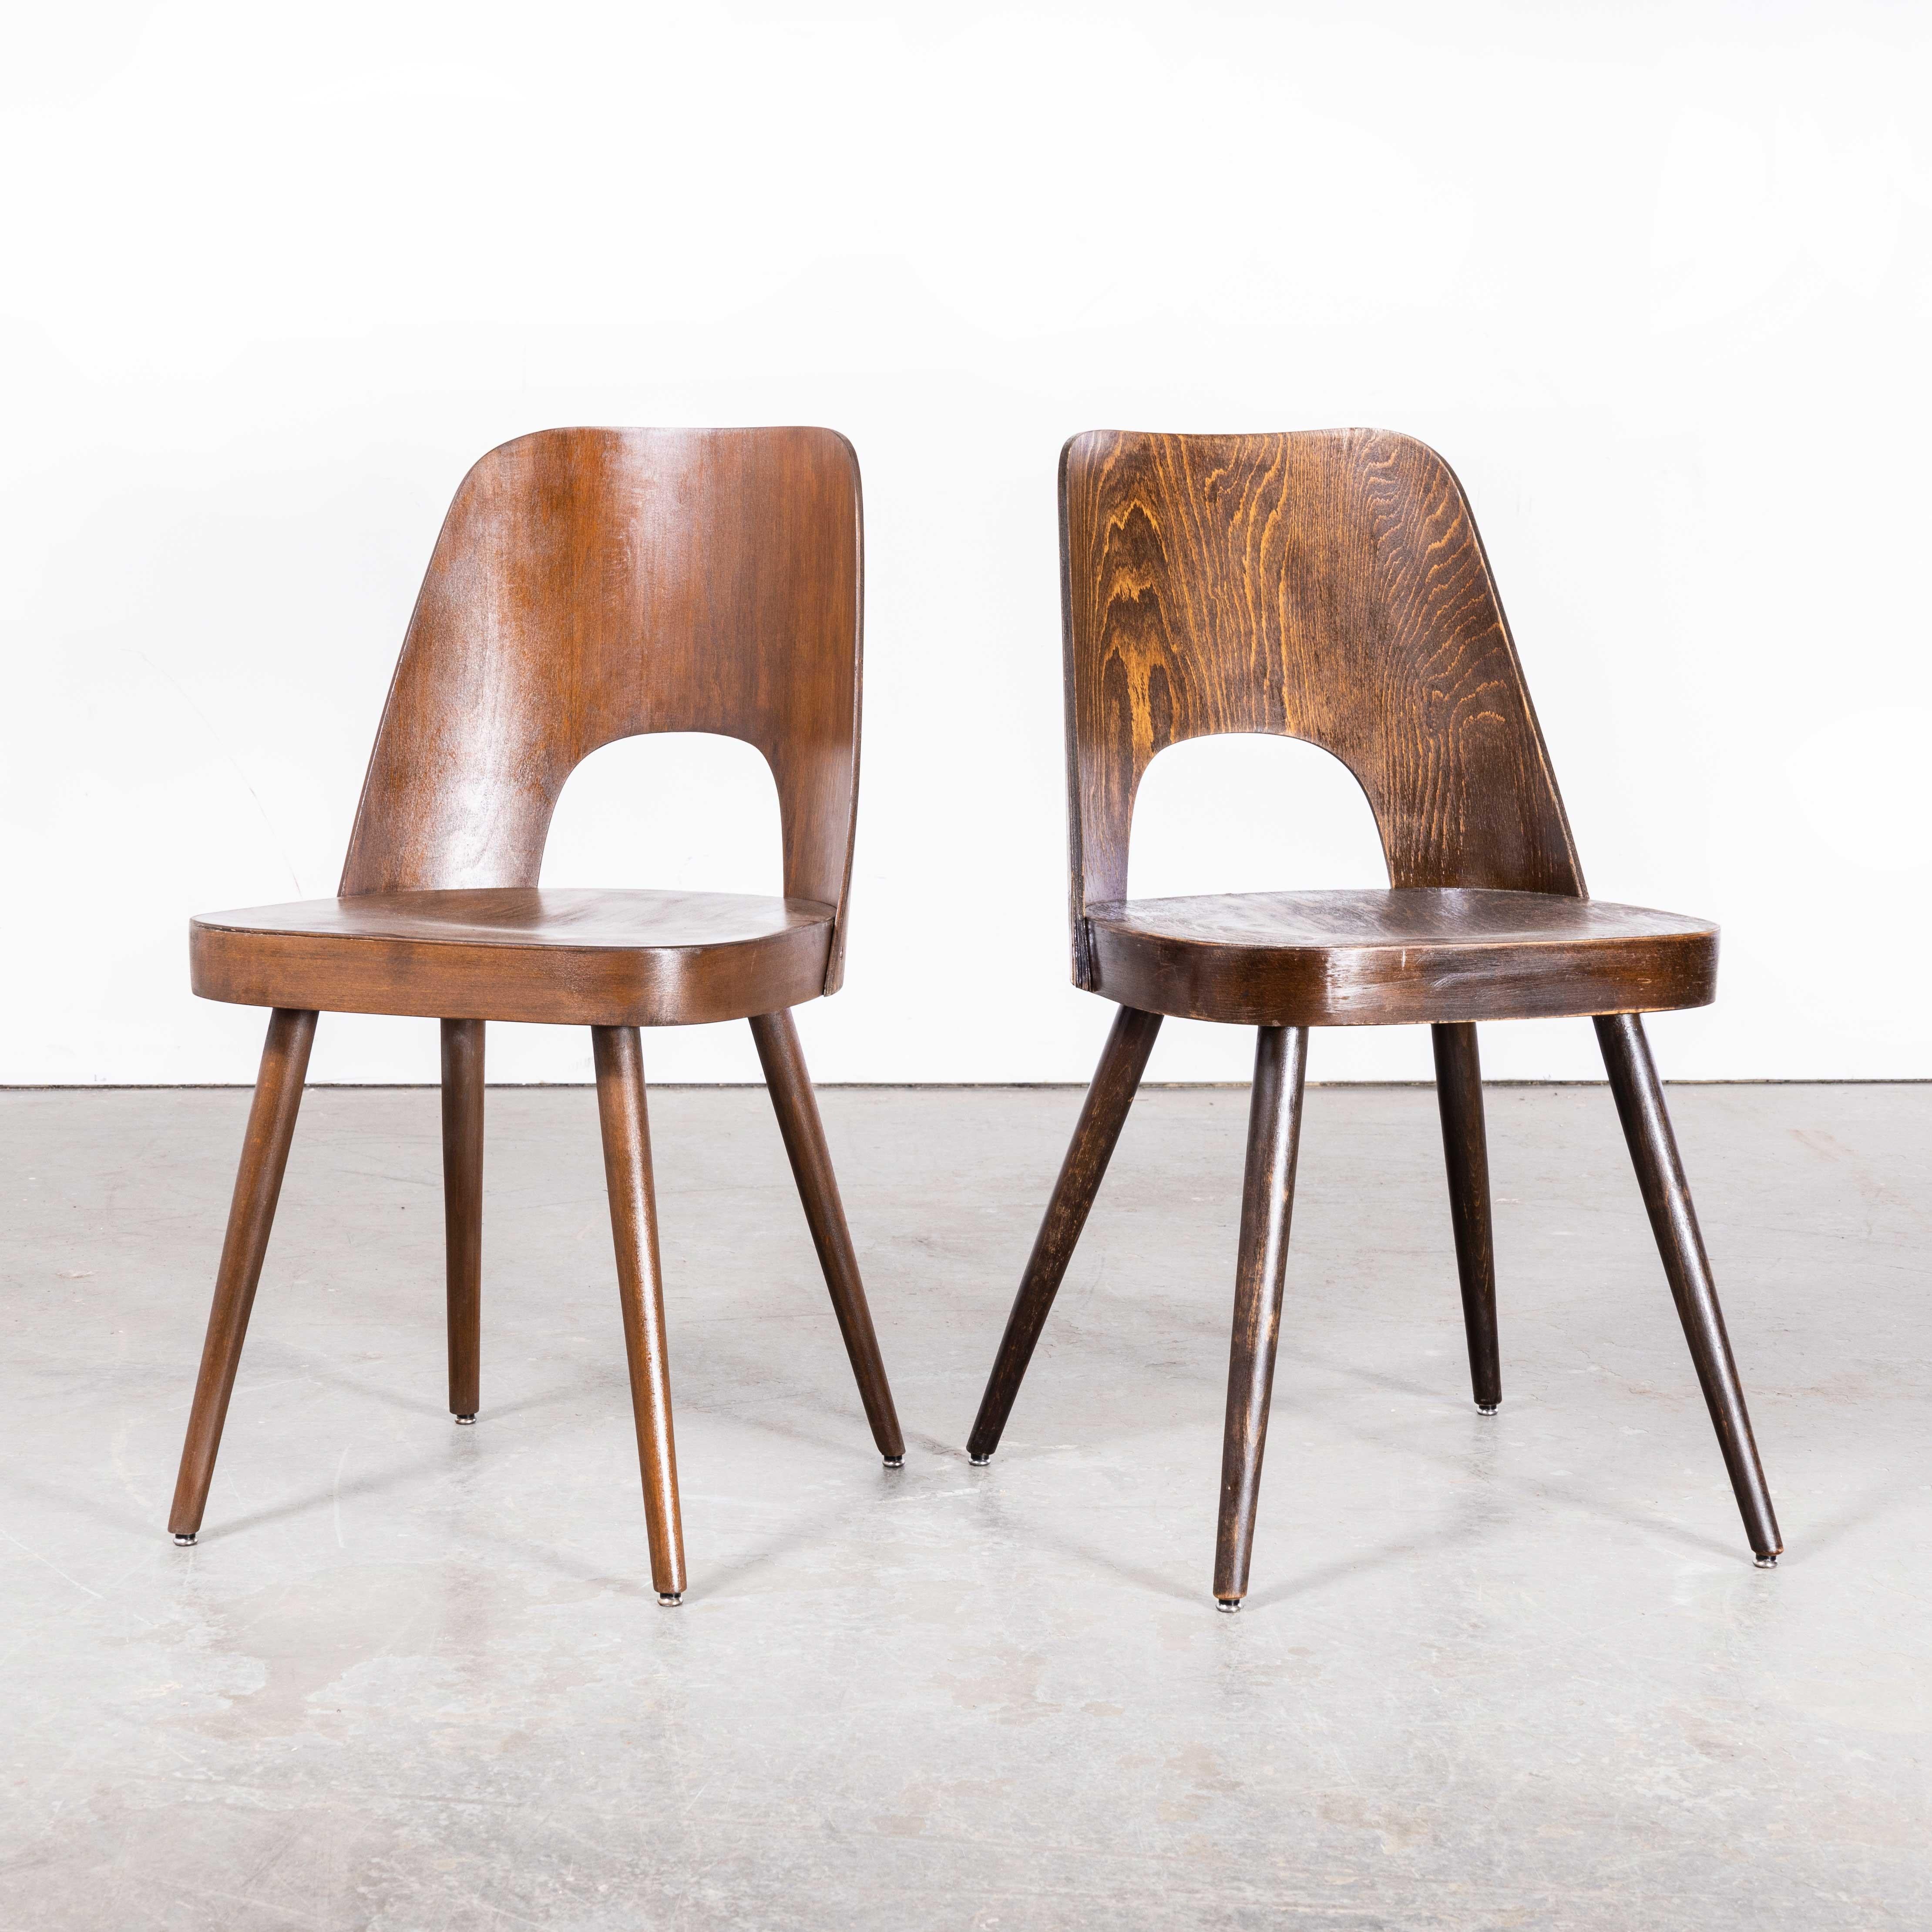 1950’s Dark Beech Side Chair – Oswald Haerdtl Model 515 – Pair
1950’s Dark Beech Side Chair – Oswald Haerdtl Model 515 – Pair. This chair was produced by the famous Czech firm Ton, still trading today and producing beautiful furniture, they are an